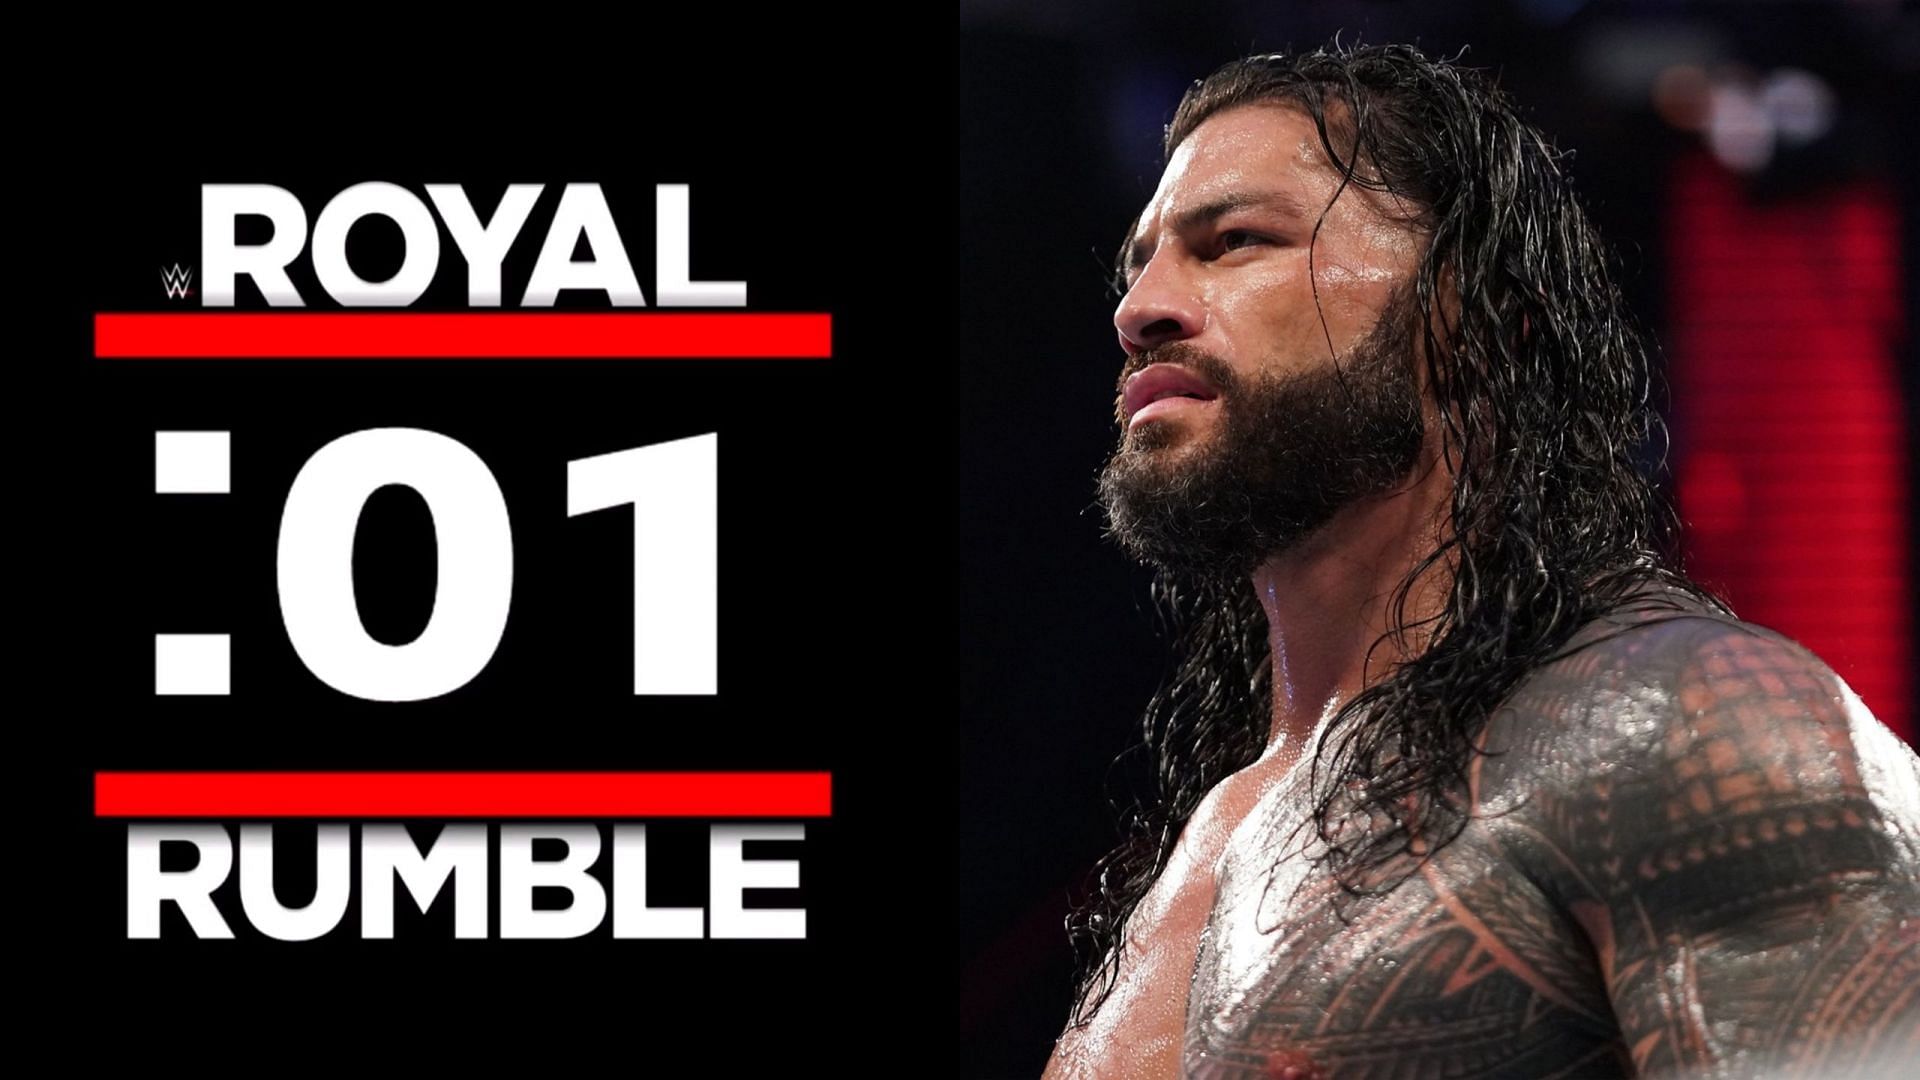 Major surprises could be in store for the upcoming Royal Rumble